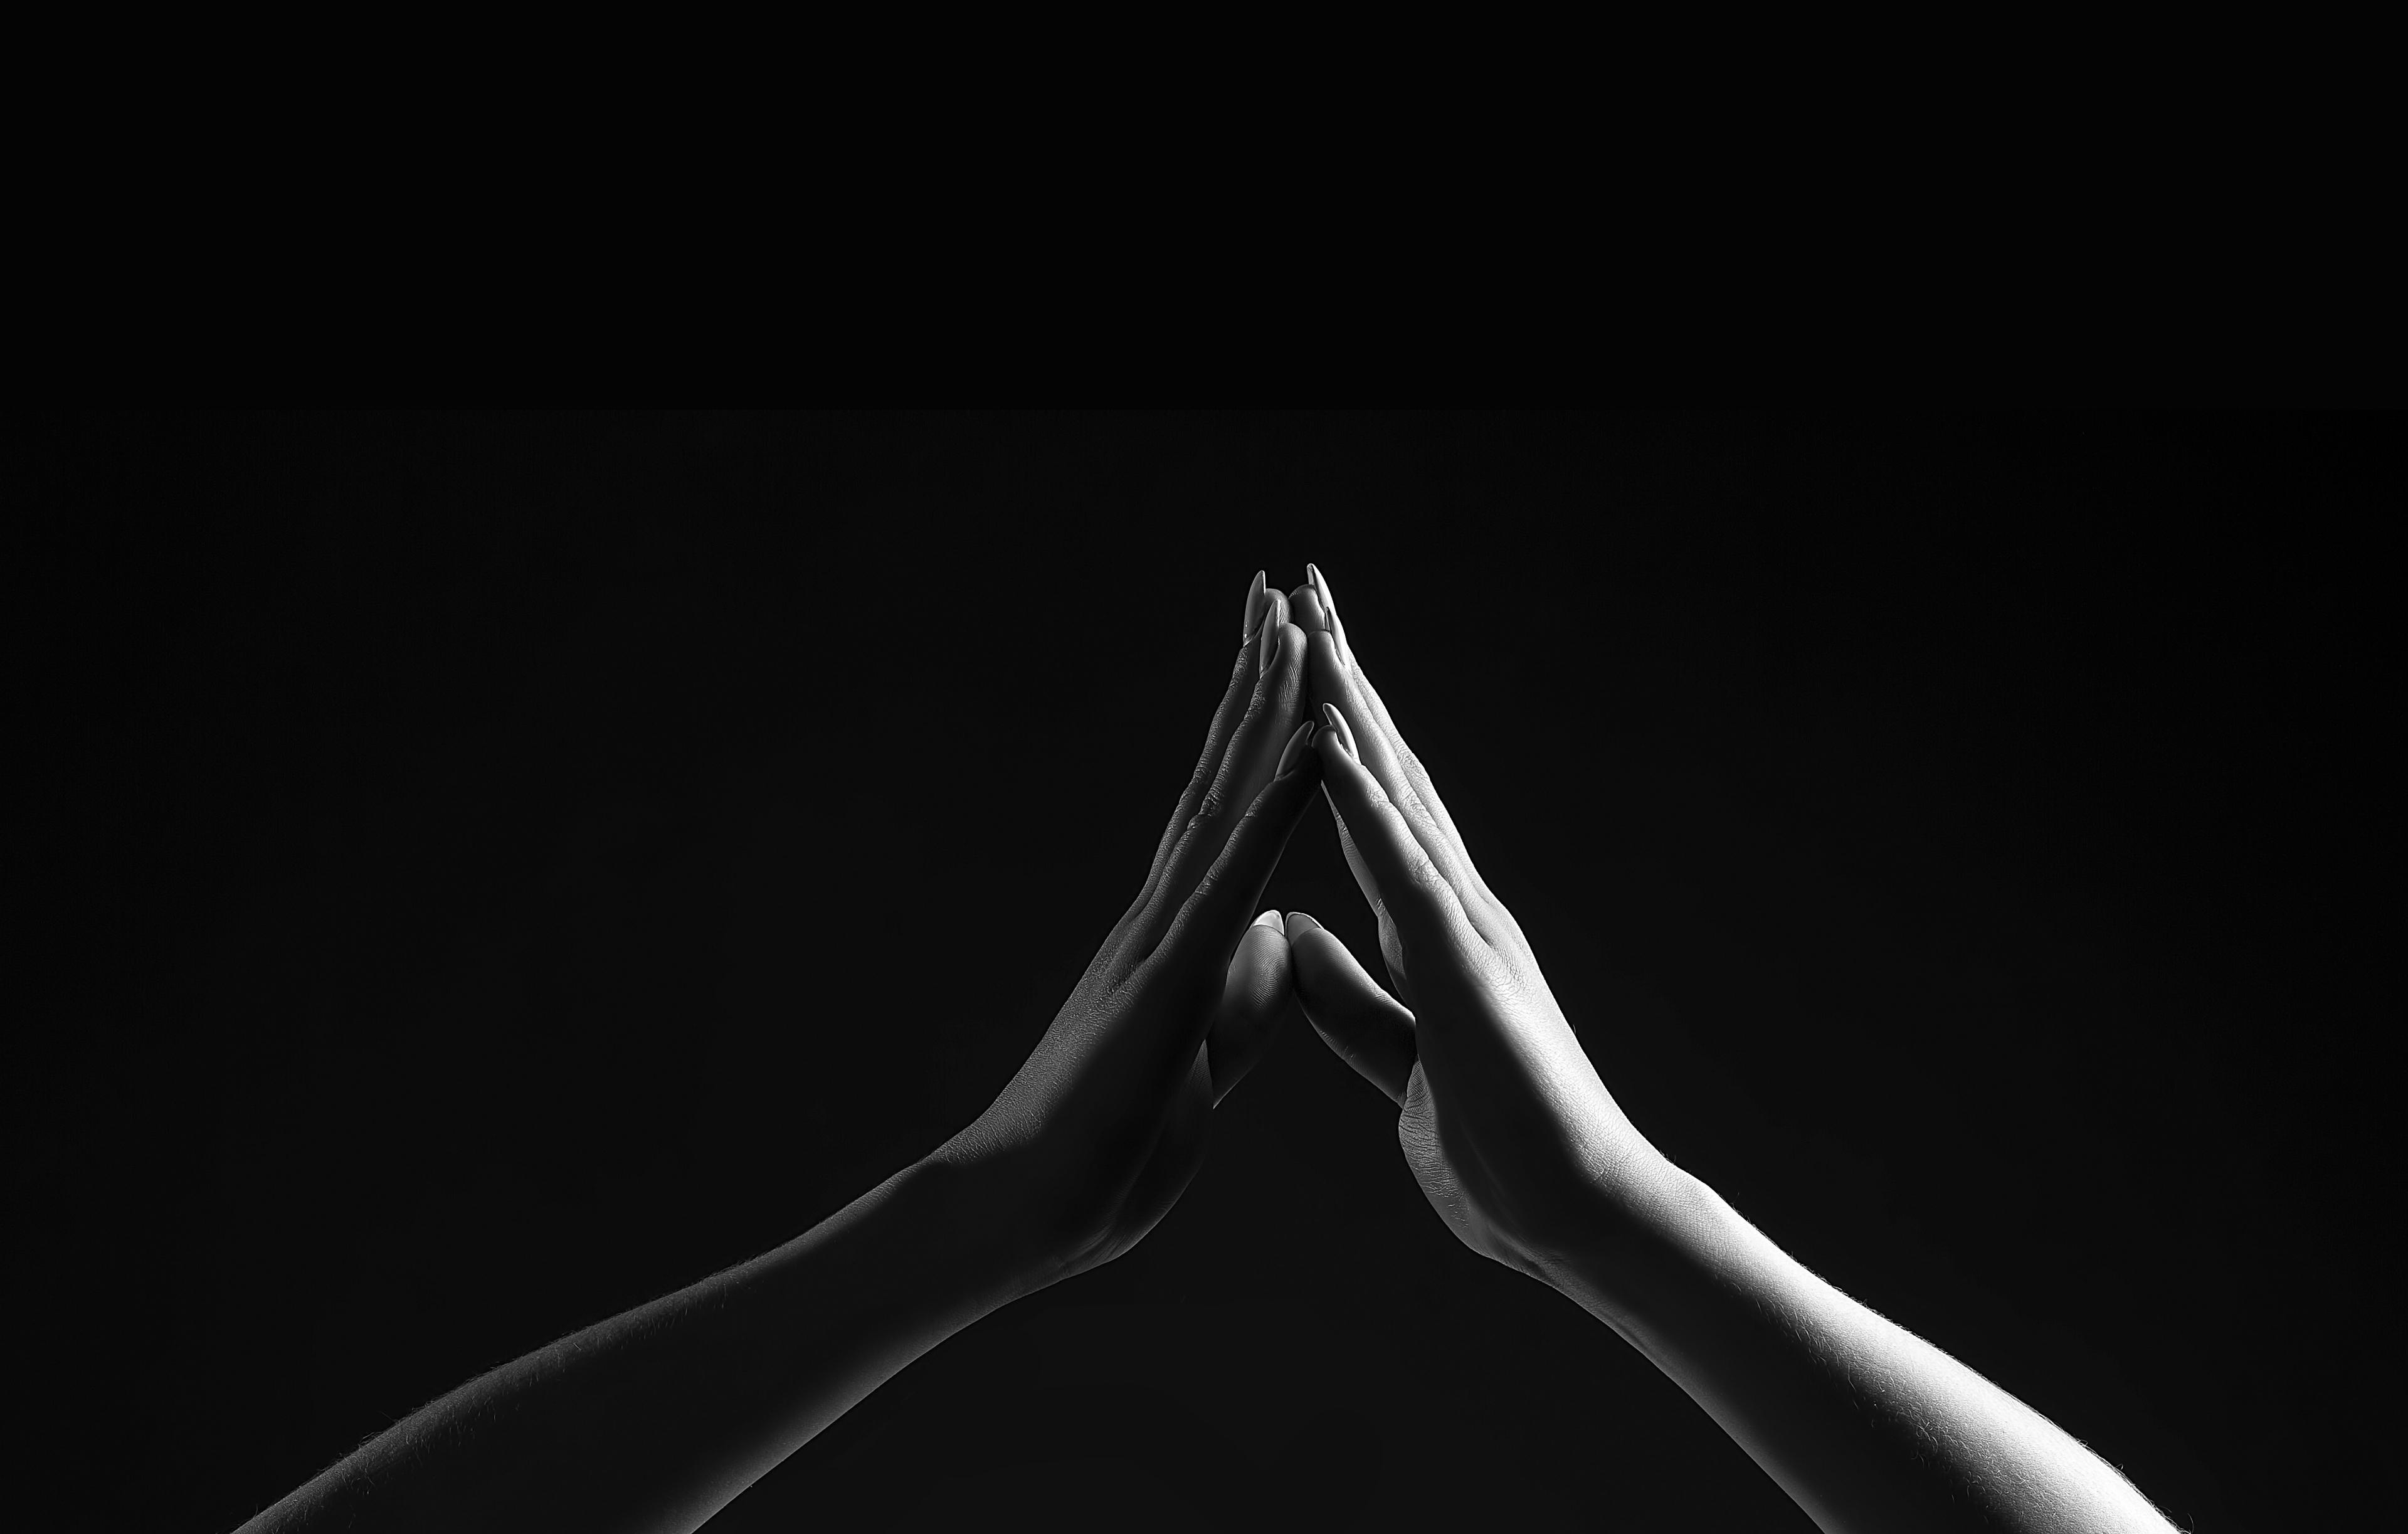 A person's hands and lower arms: the hands touch at the fingertips, palms separated, pointed upwards as if in prayer. 